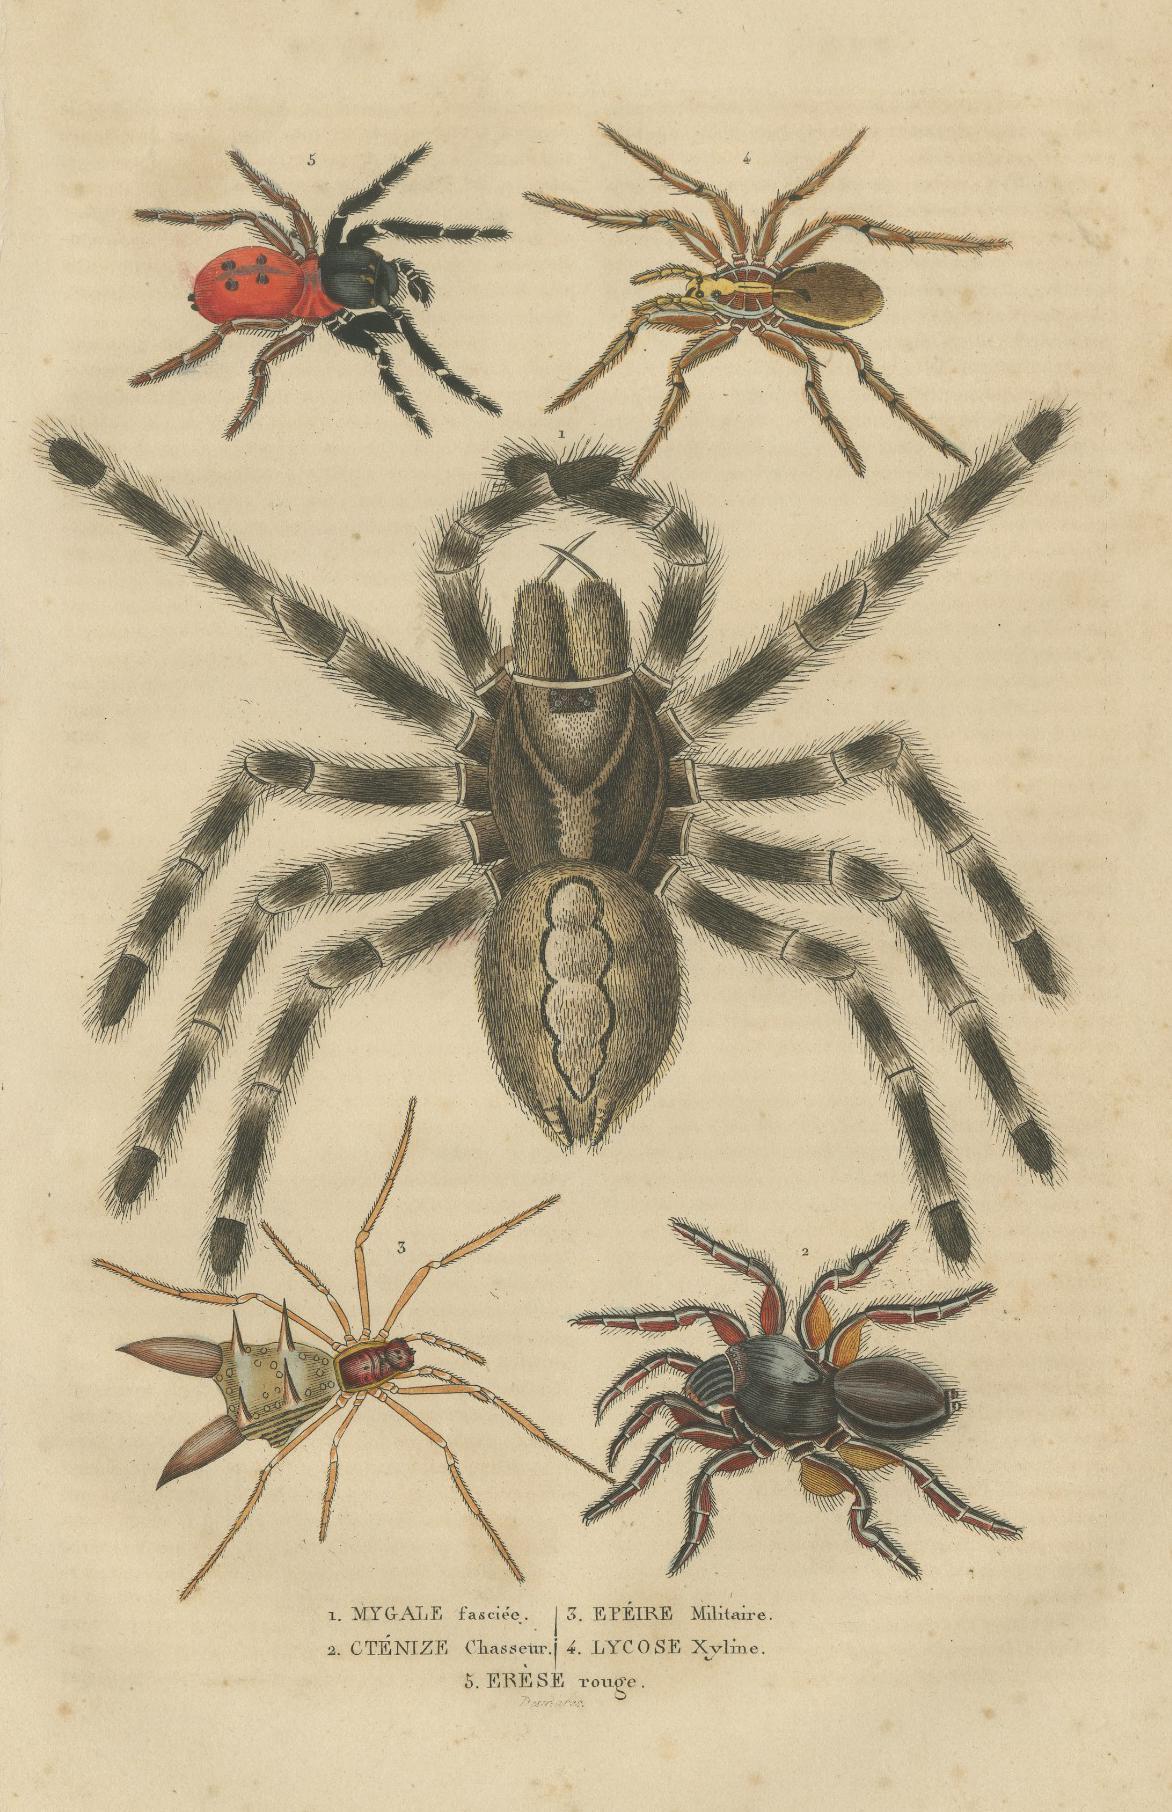 Engraved Antique 1845 Arachnid Study: Handcolored Engraving of Varied Spider Species For Sale